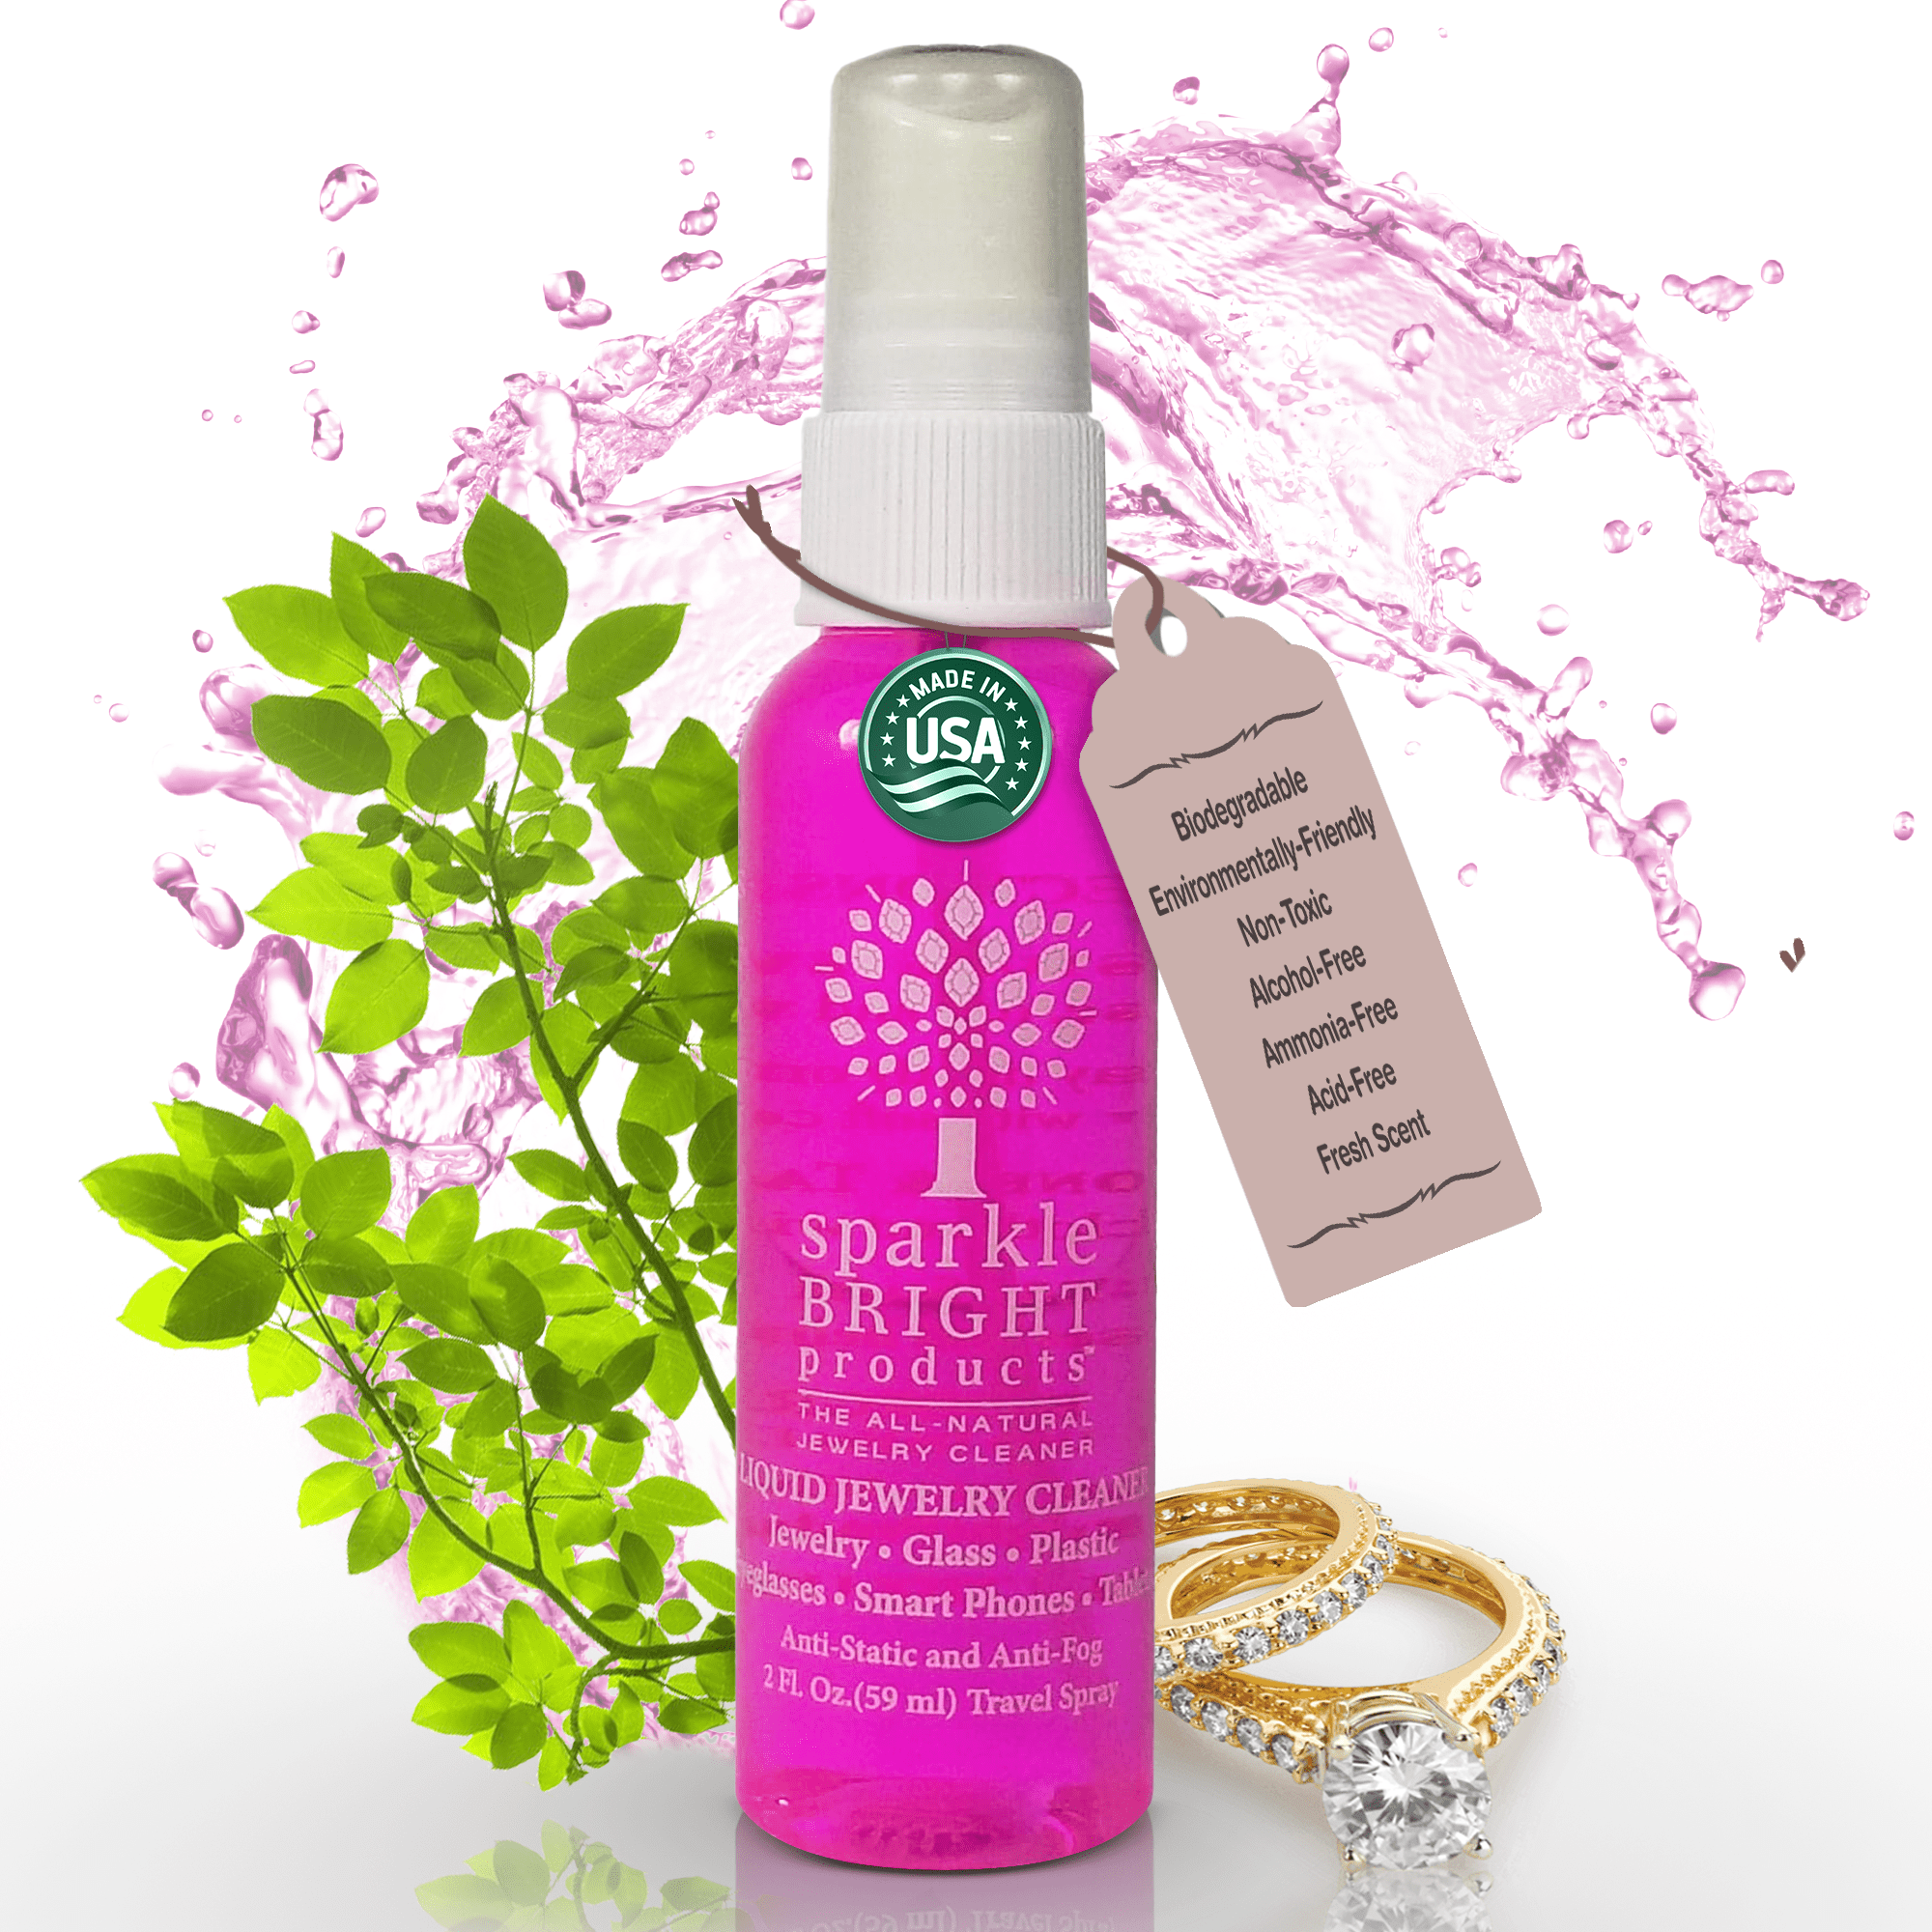 Diamond-shine Jewelry Cleaner Spray, Jewelry Cleaning Solution, Jewellery  Cleaner, Quick Jewelry Cleaning Spray, Restore Sparkle